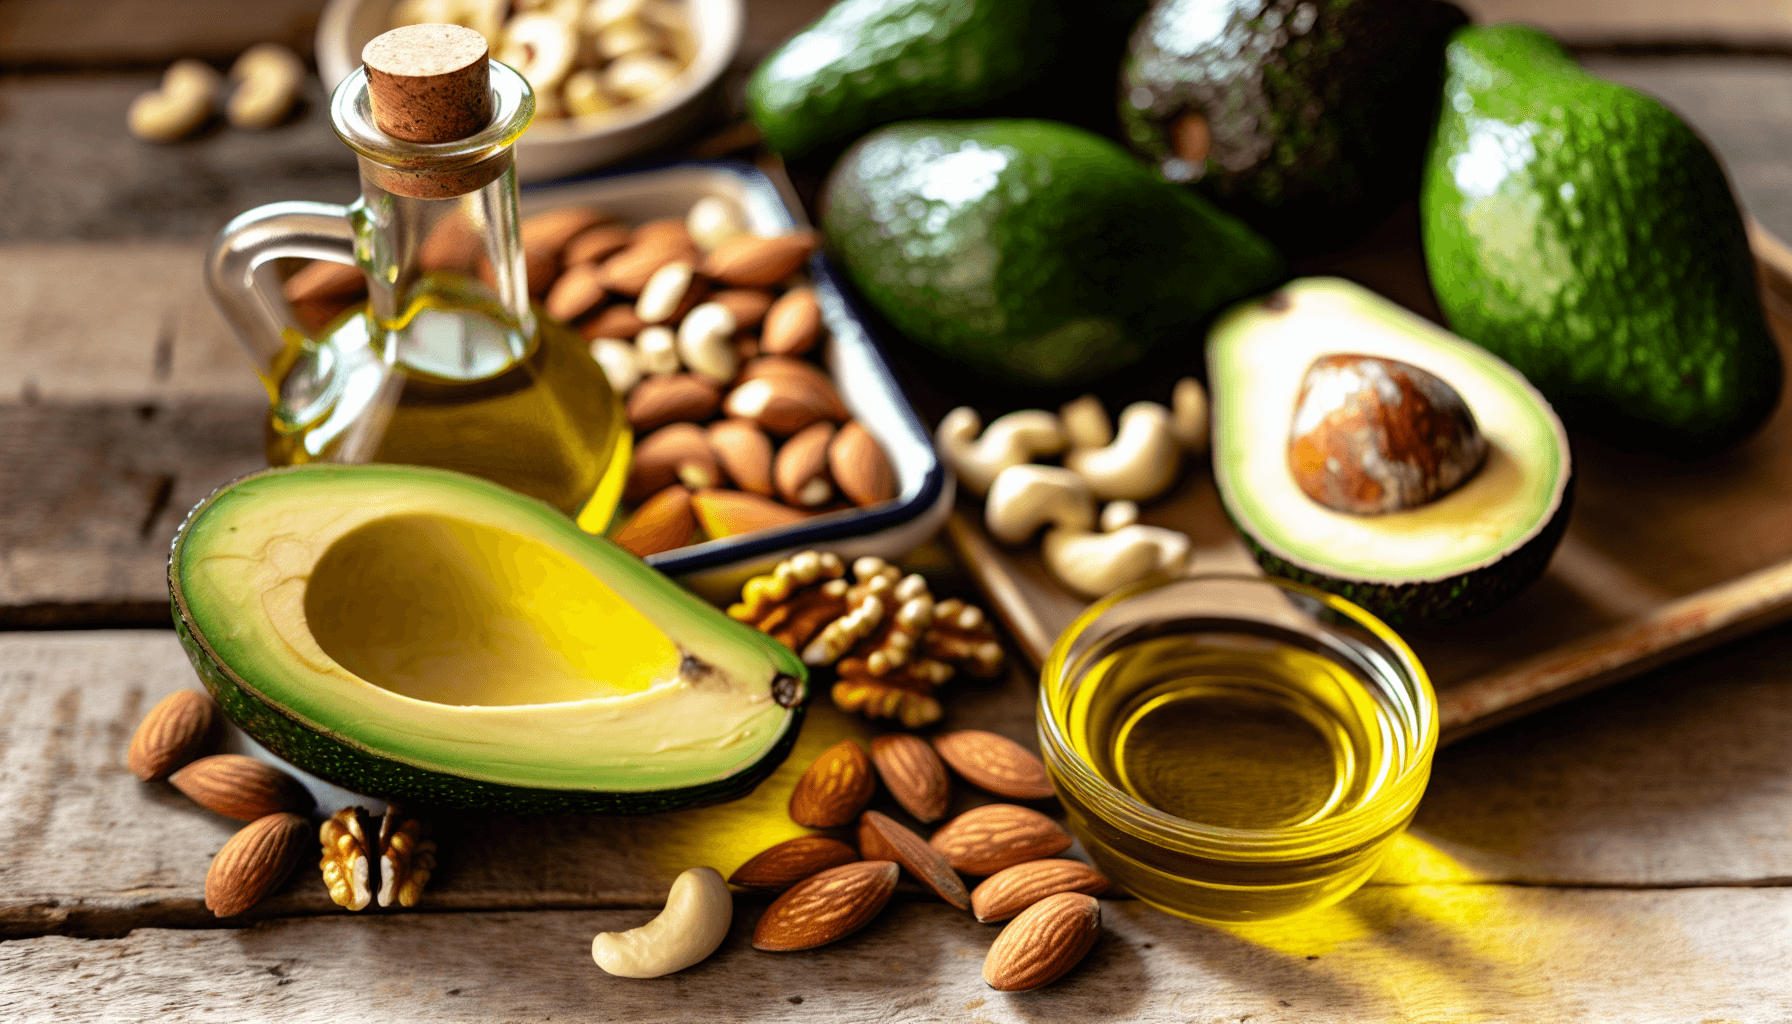 Incorporating healthy fats into post-surgery diet